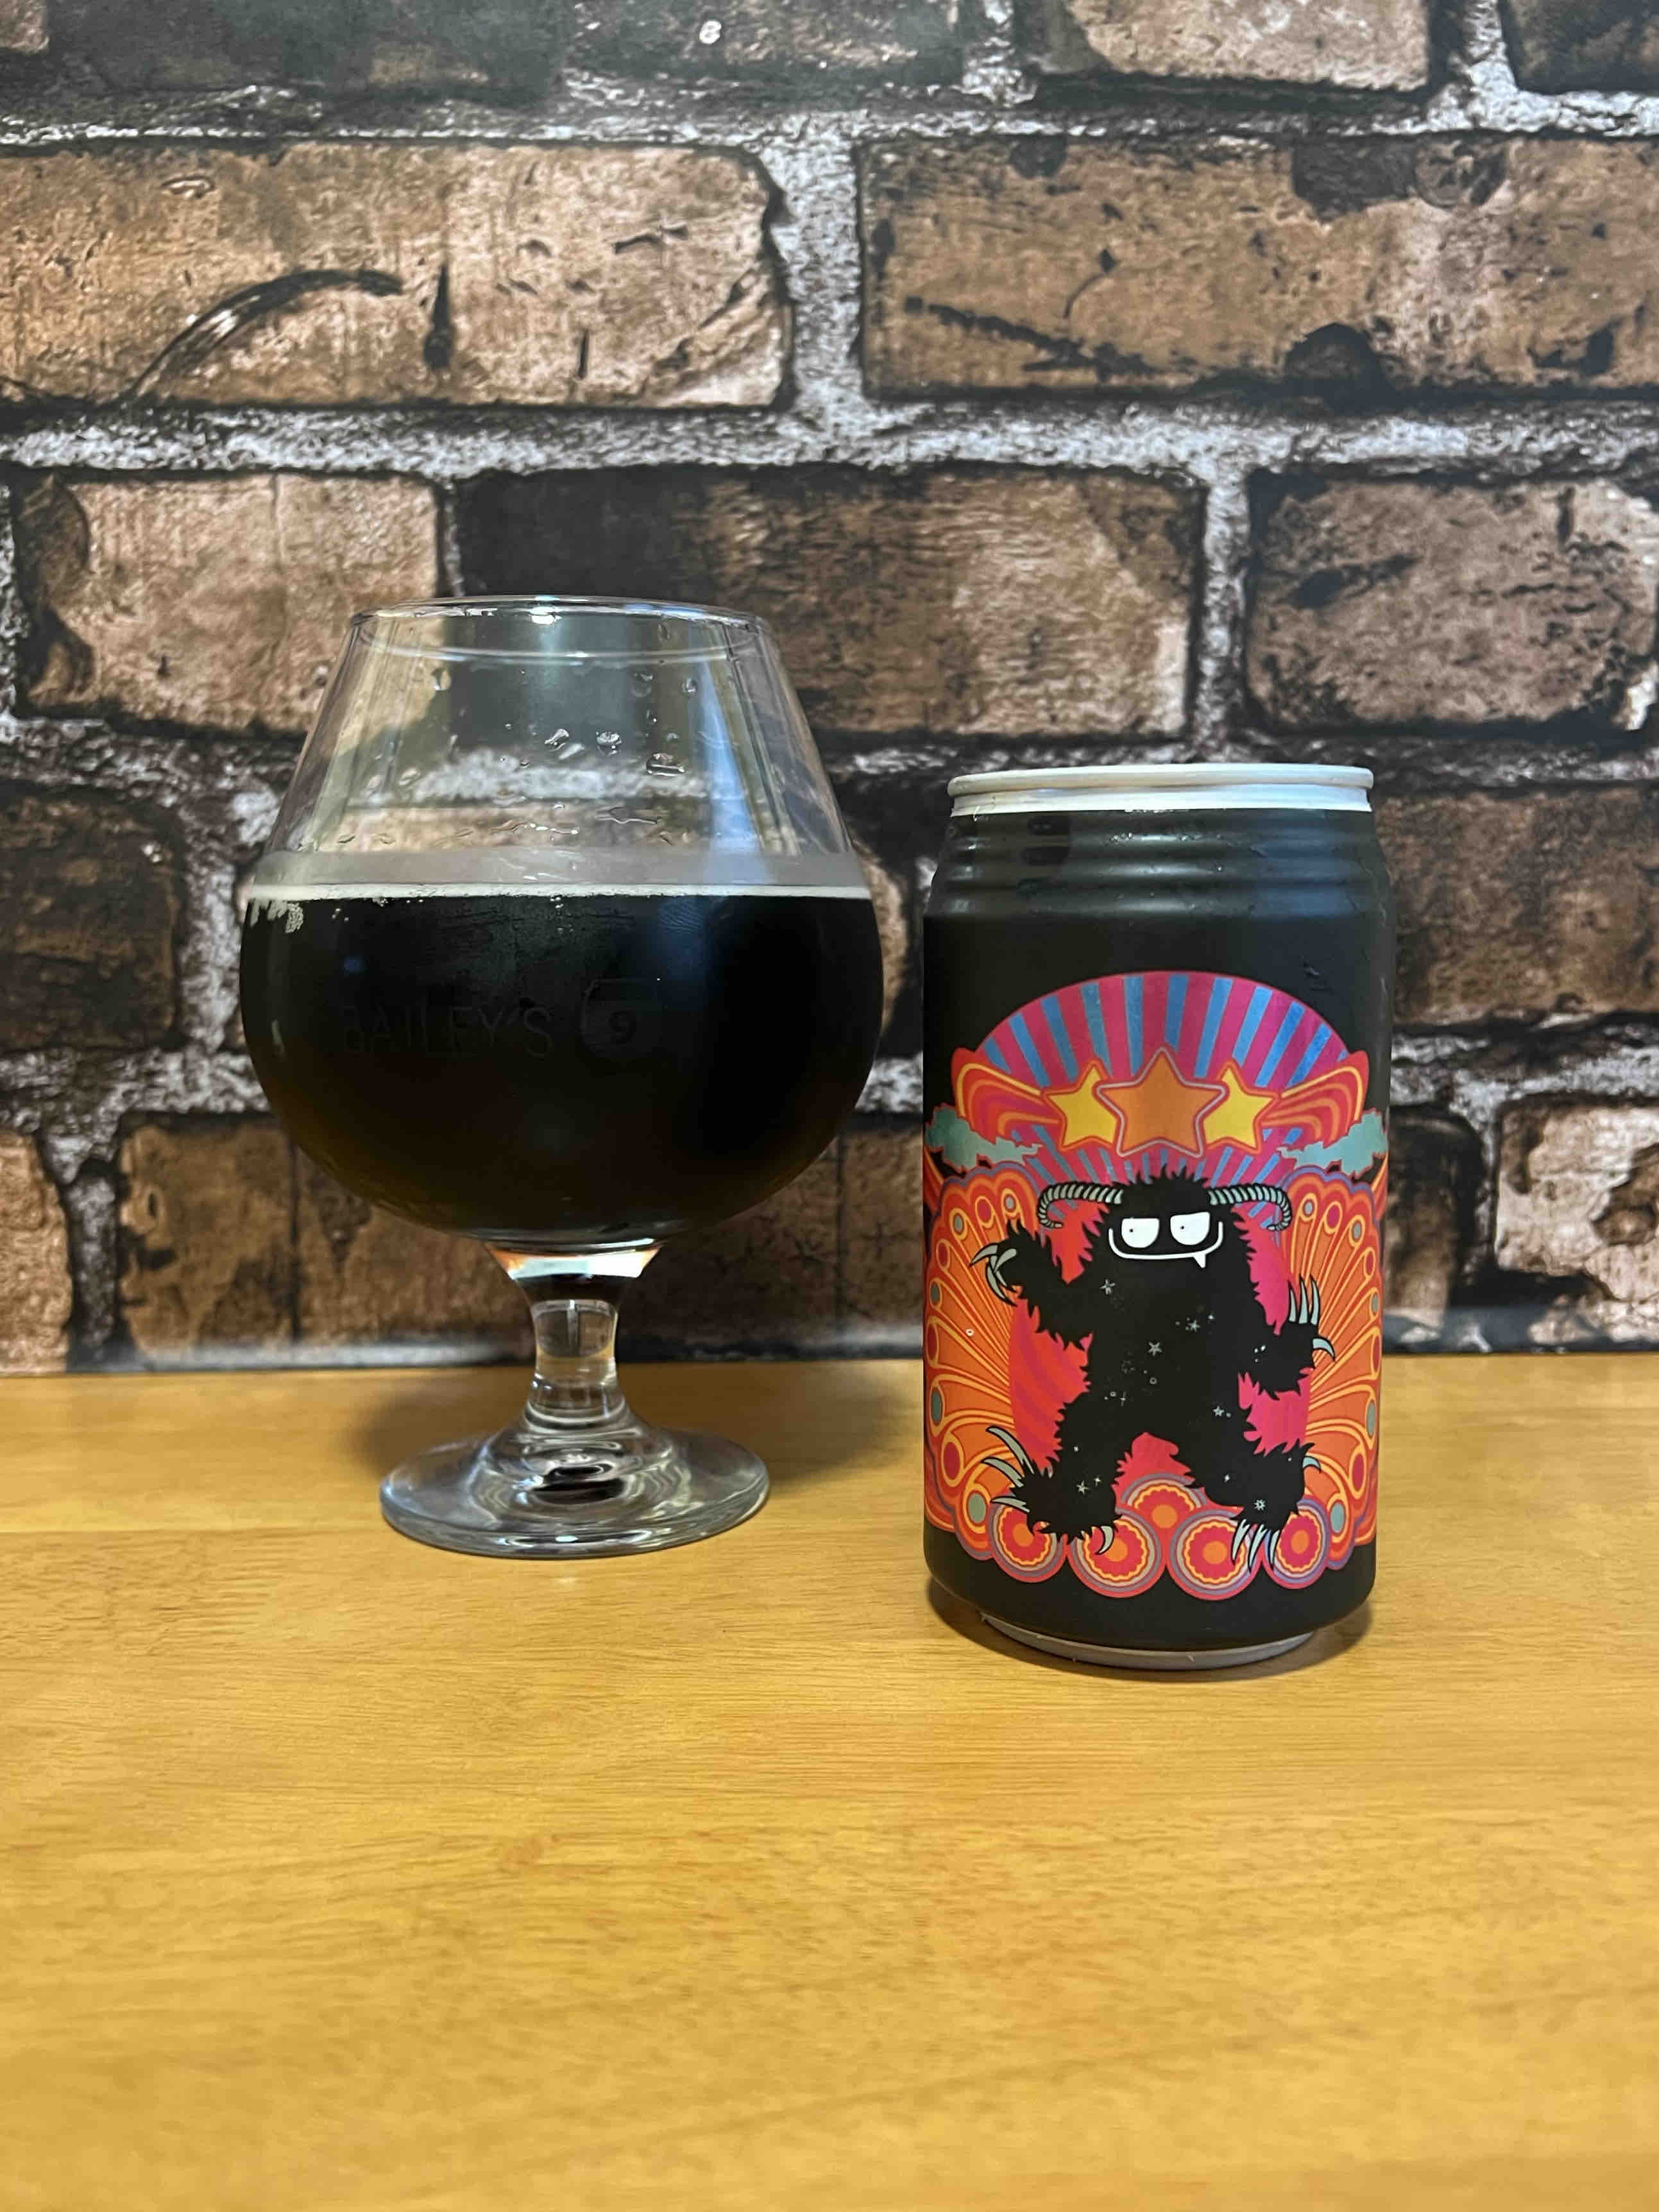 A snifter pour of Black Yeti Grisly's Cosmic Black Bourbon & Cola.